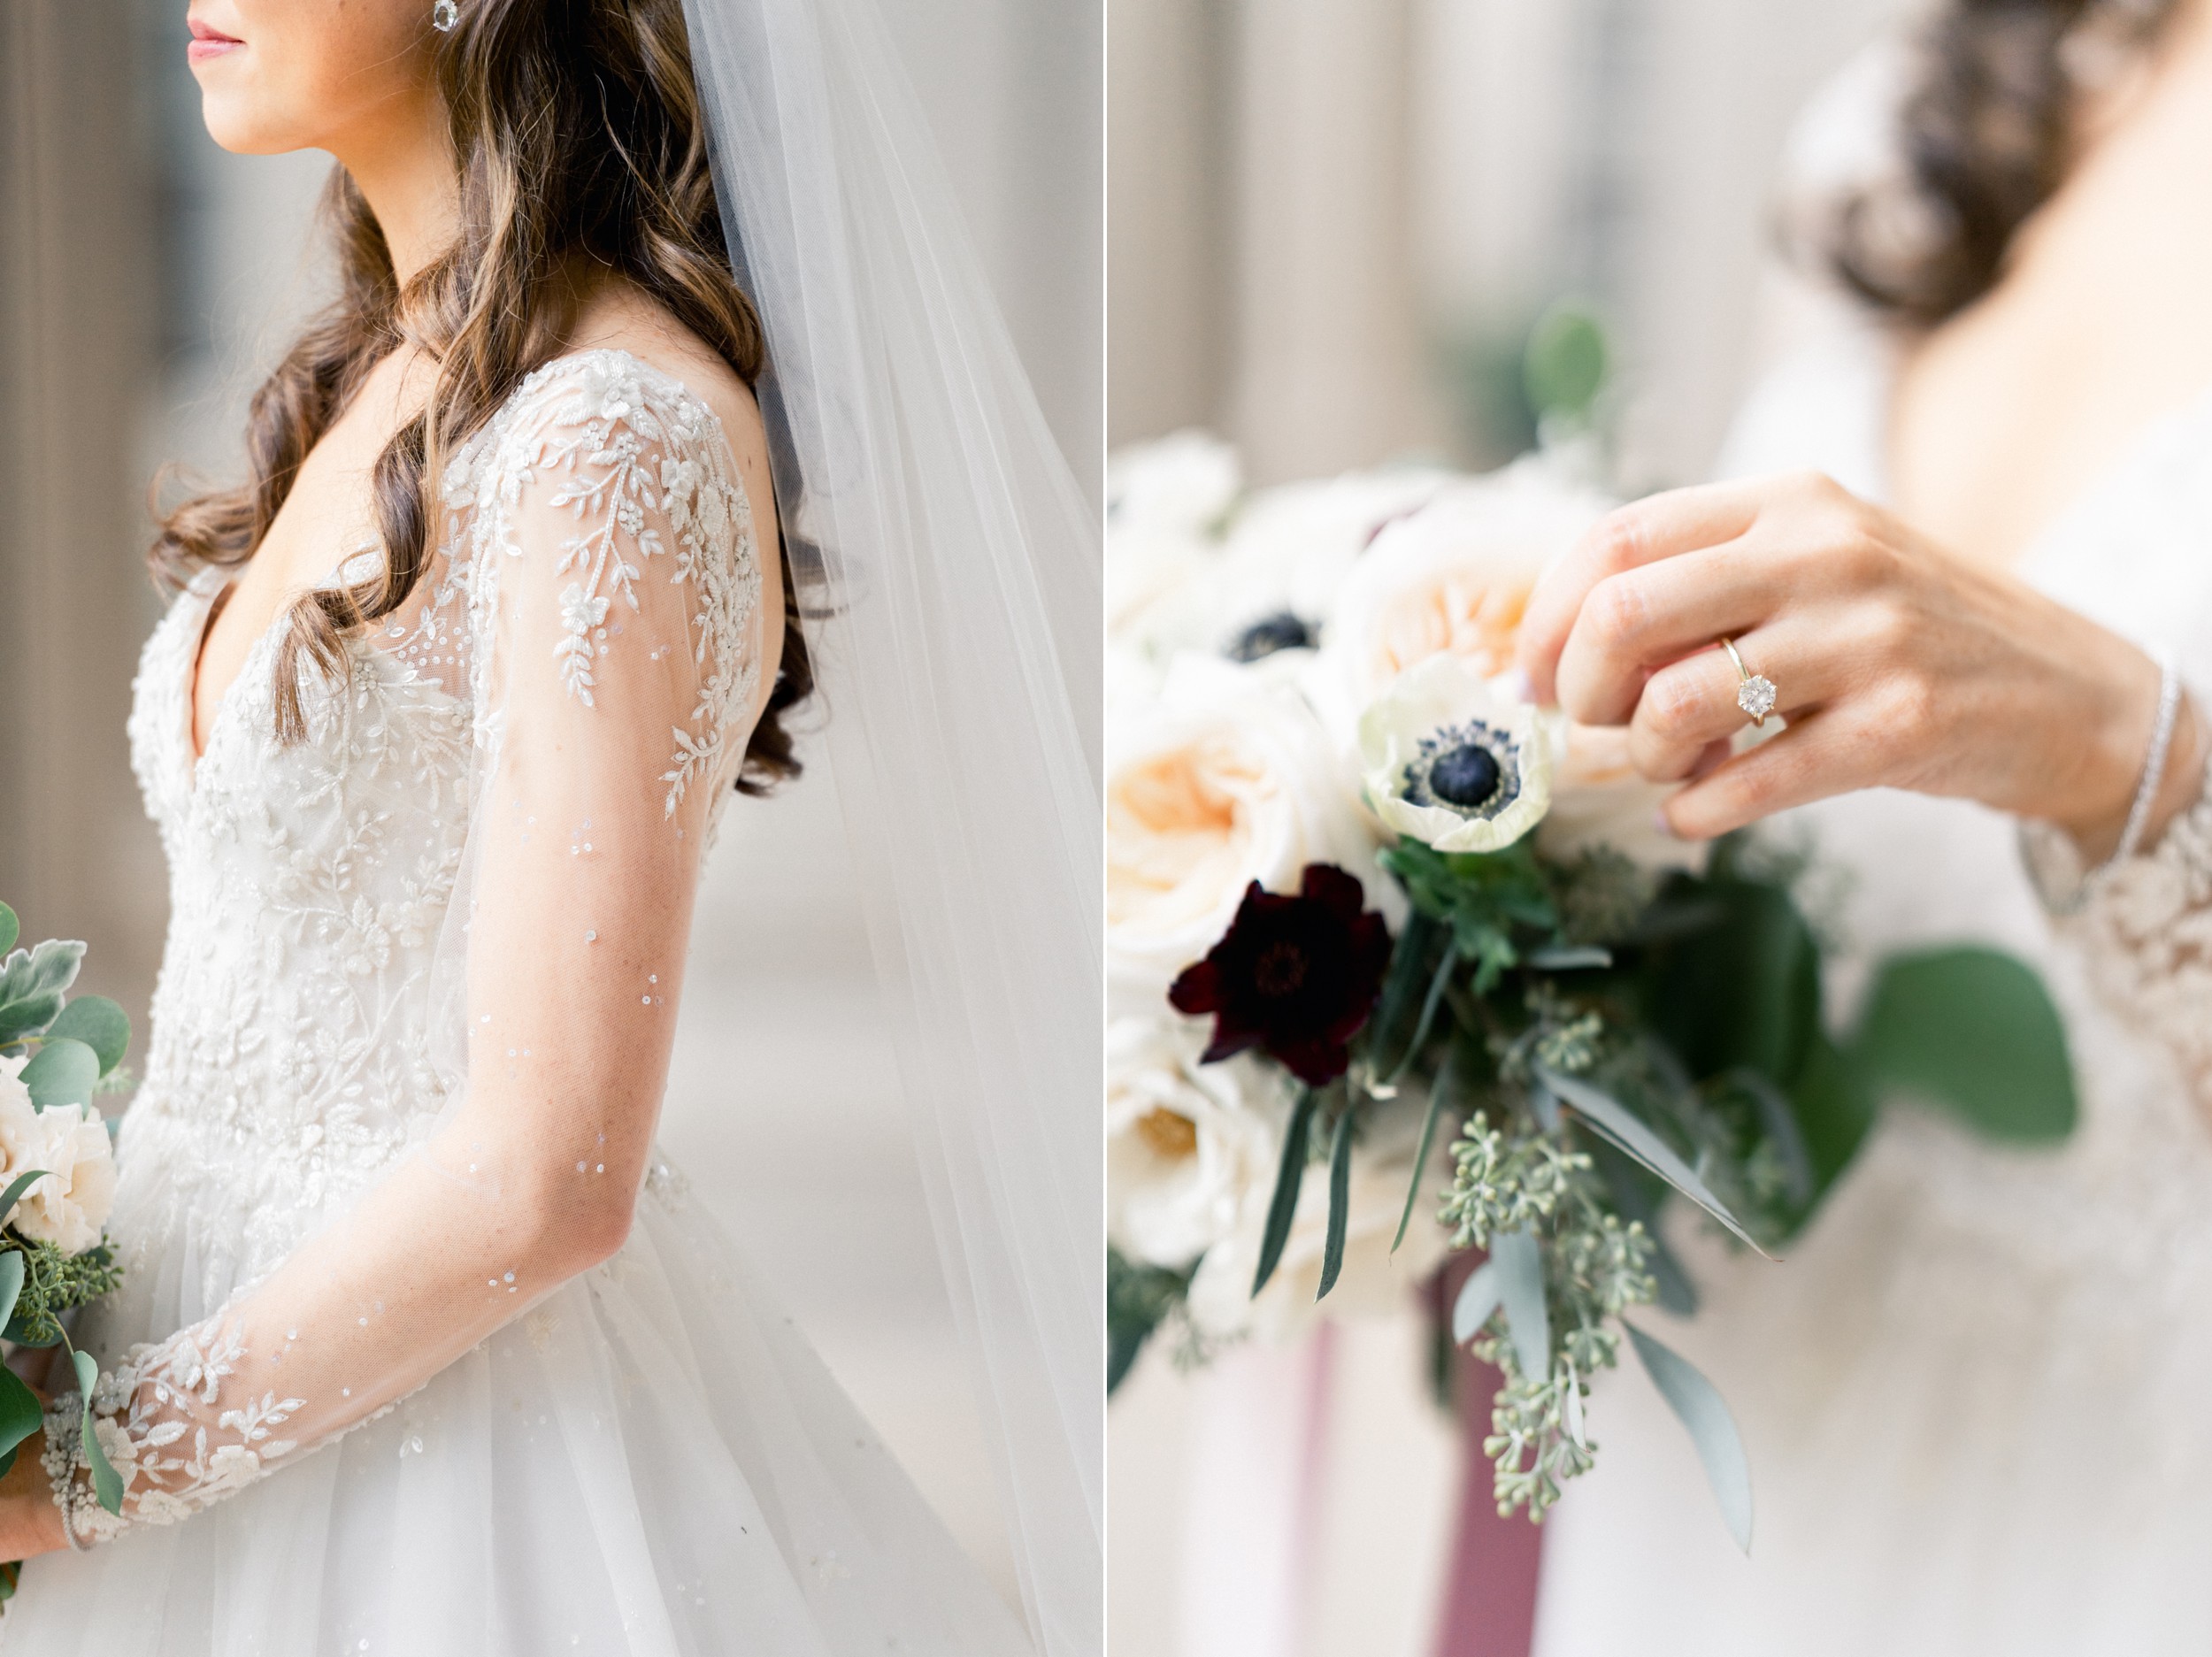 bridal details lace and beaded dress and bouquet